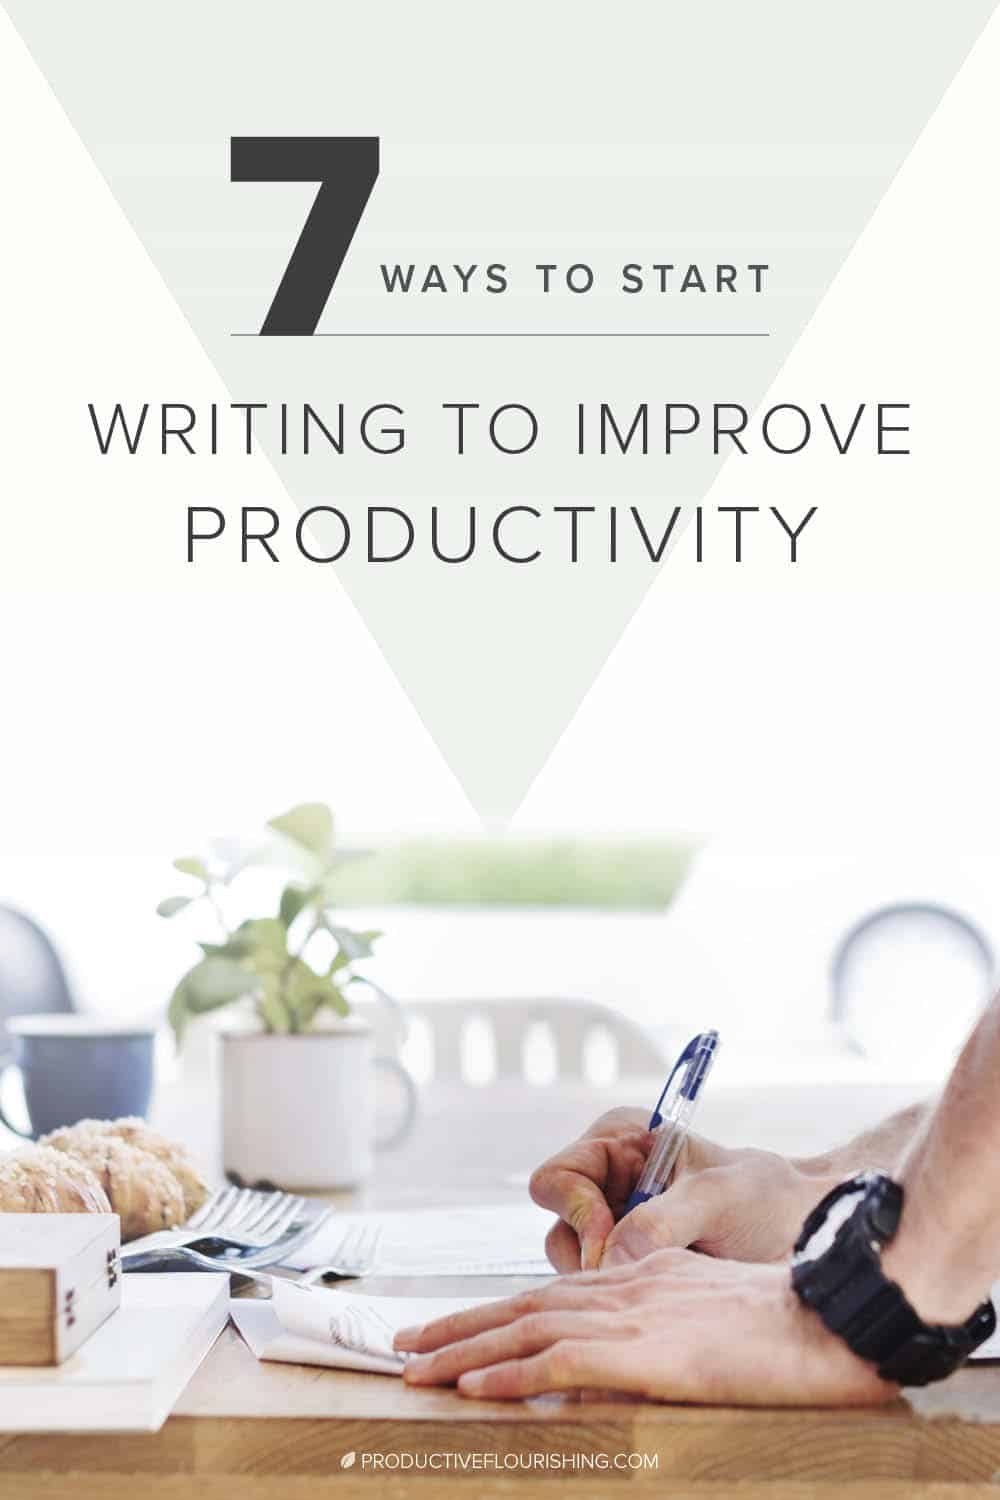 Even with the clearest of goals and intentions, entrepreneurs can find that it’s all too easy to get distracted and end up accomplishing very little. The act of writing is inherently mindful, bringing people into a state of awareness of their thoughts and of the present moment. Here are 7 ways you can start writing to improve your business productivity. #businessproductivity #smallbusinessowner #productiveflourishing